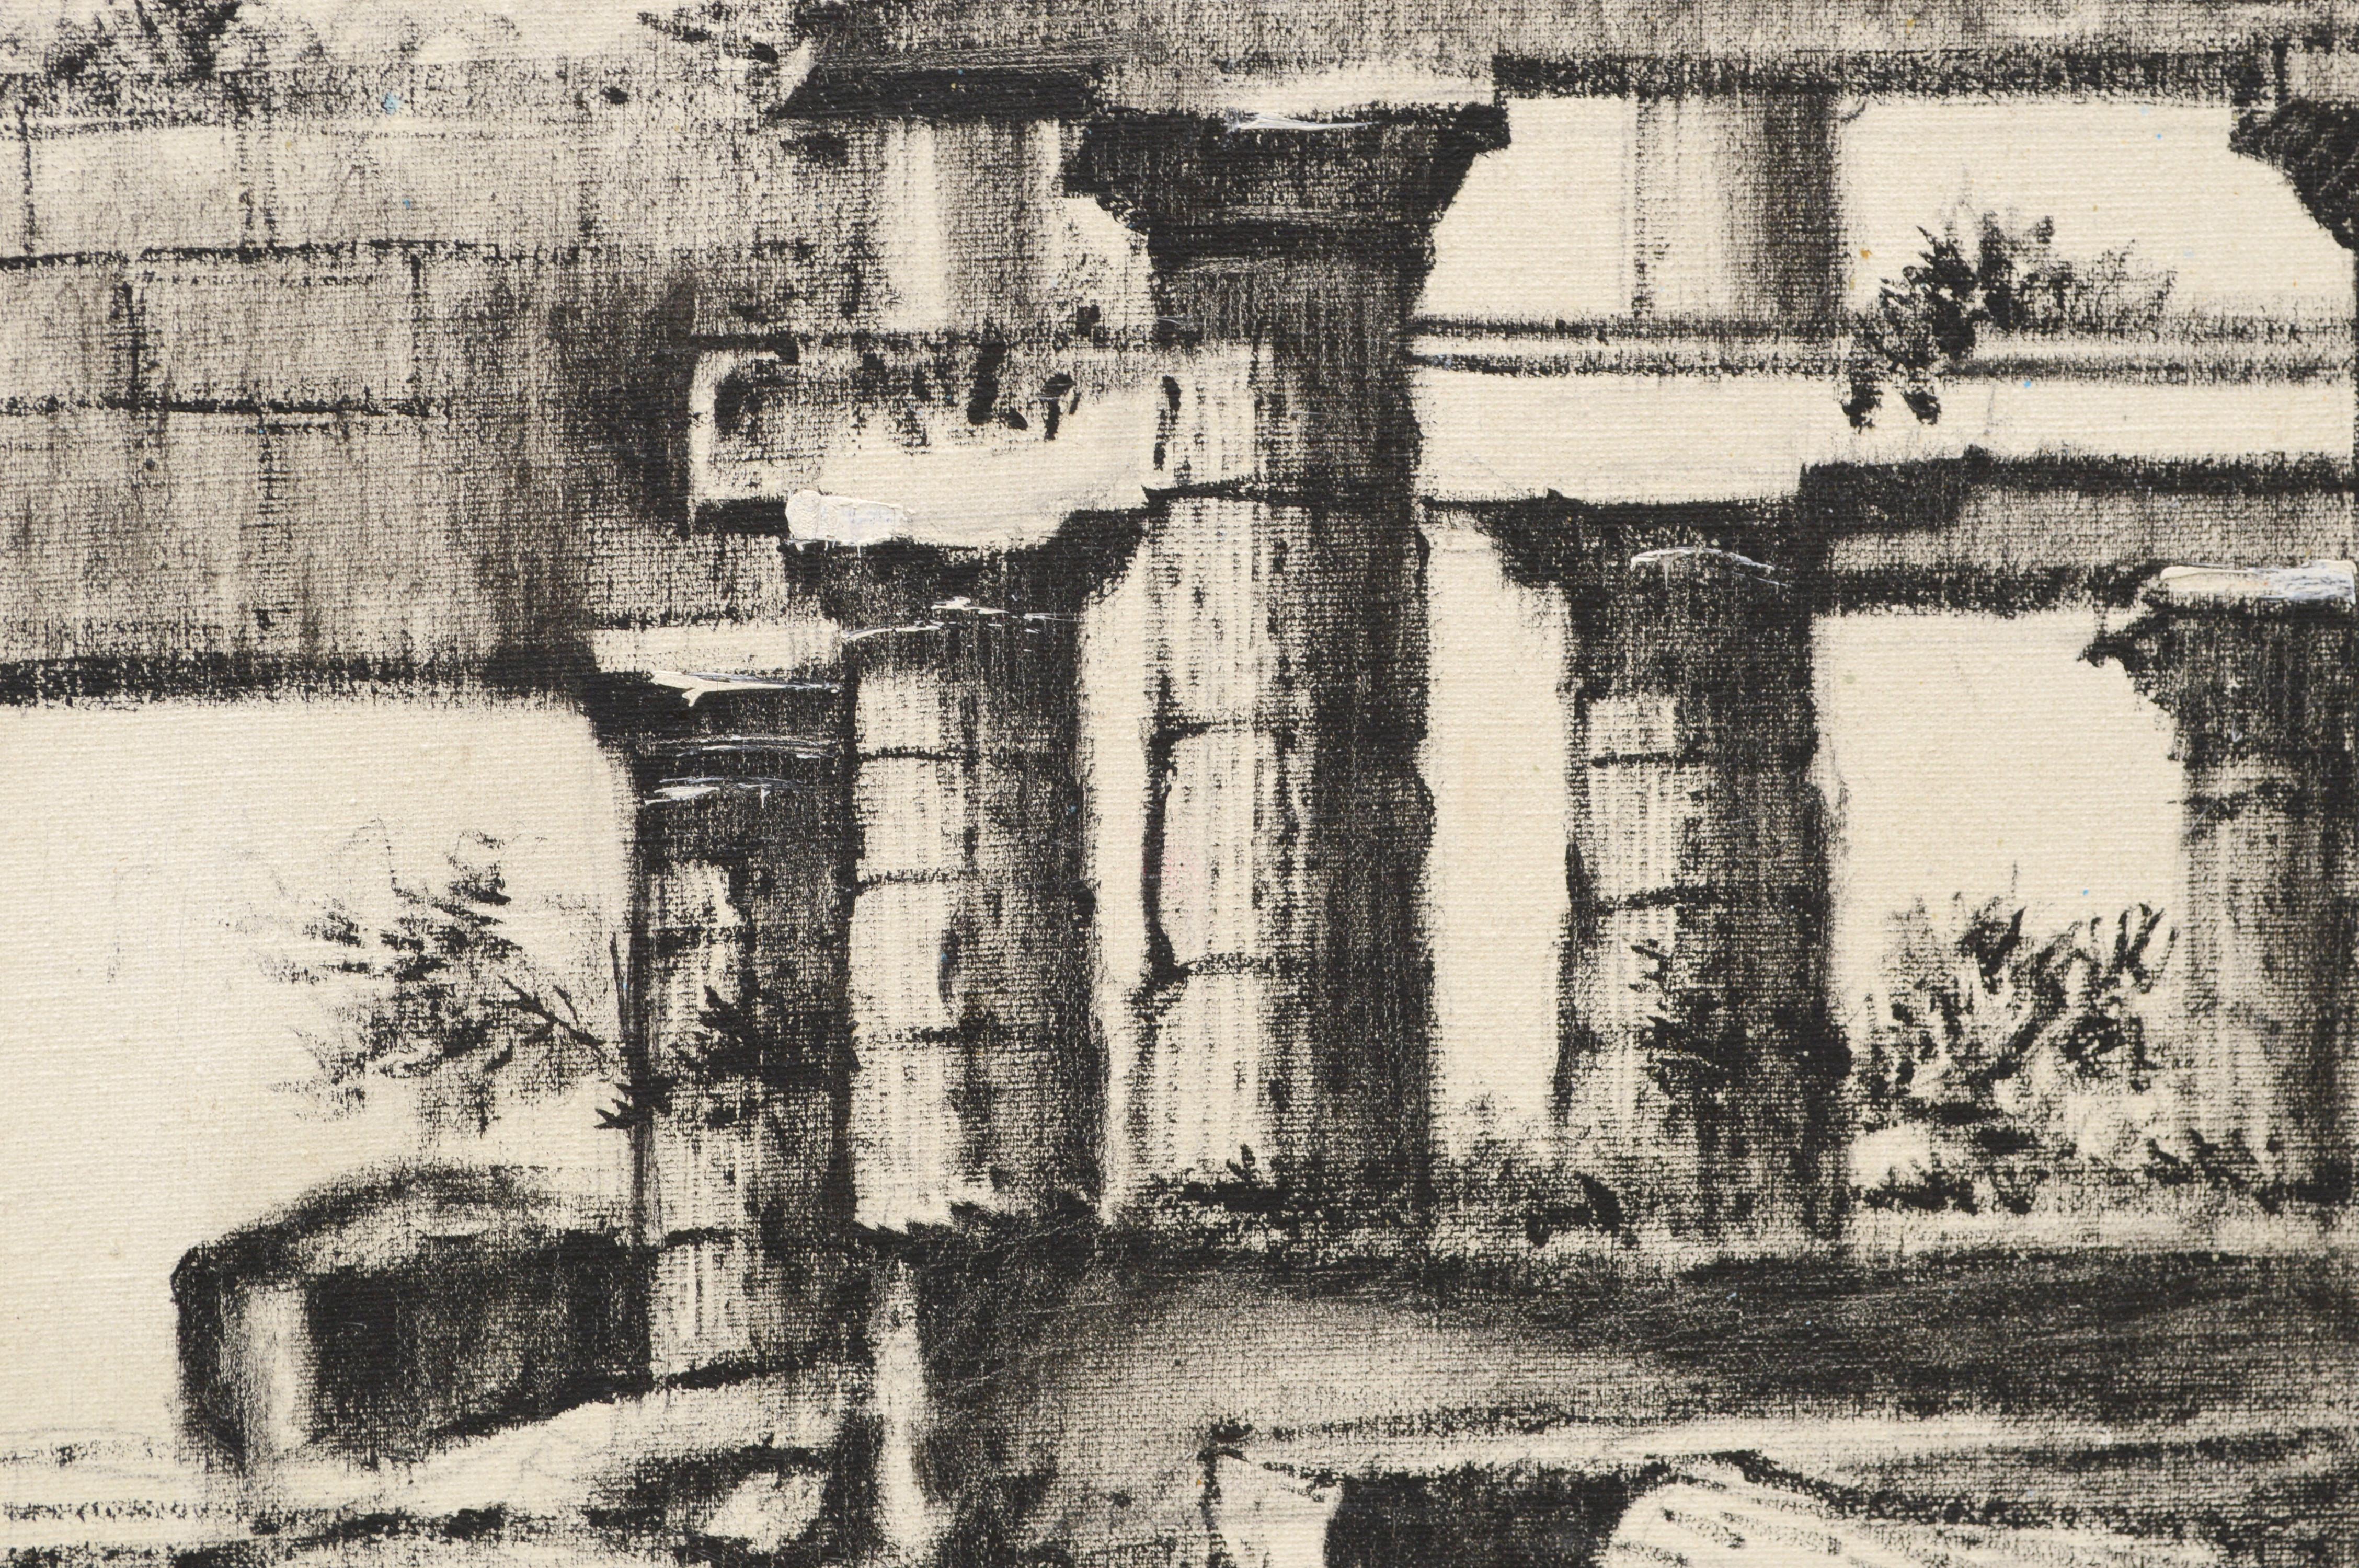 Monochrome Aqueduct Study - Realist Painting by C. Francisco